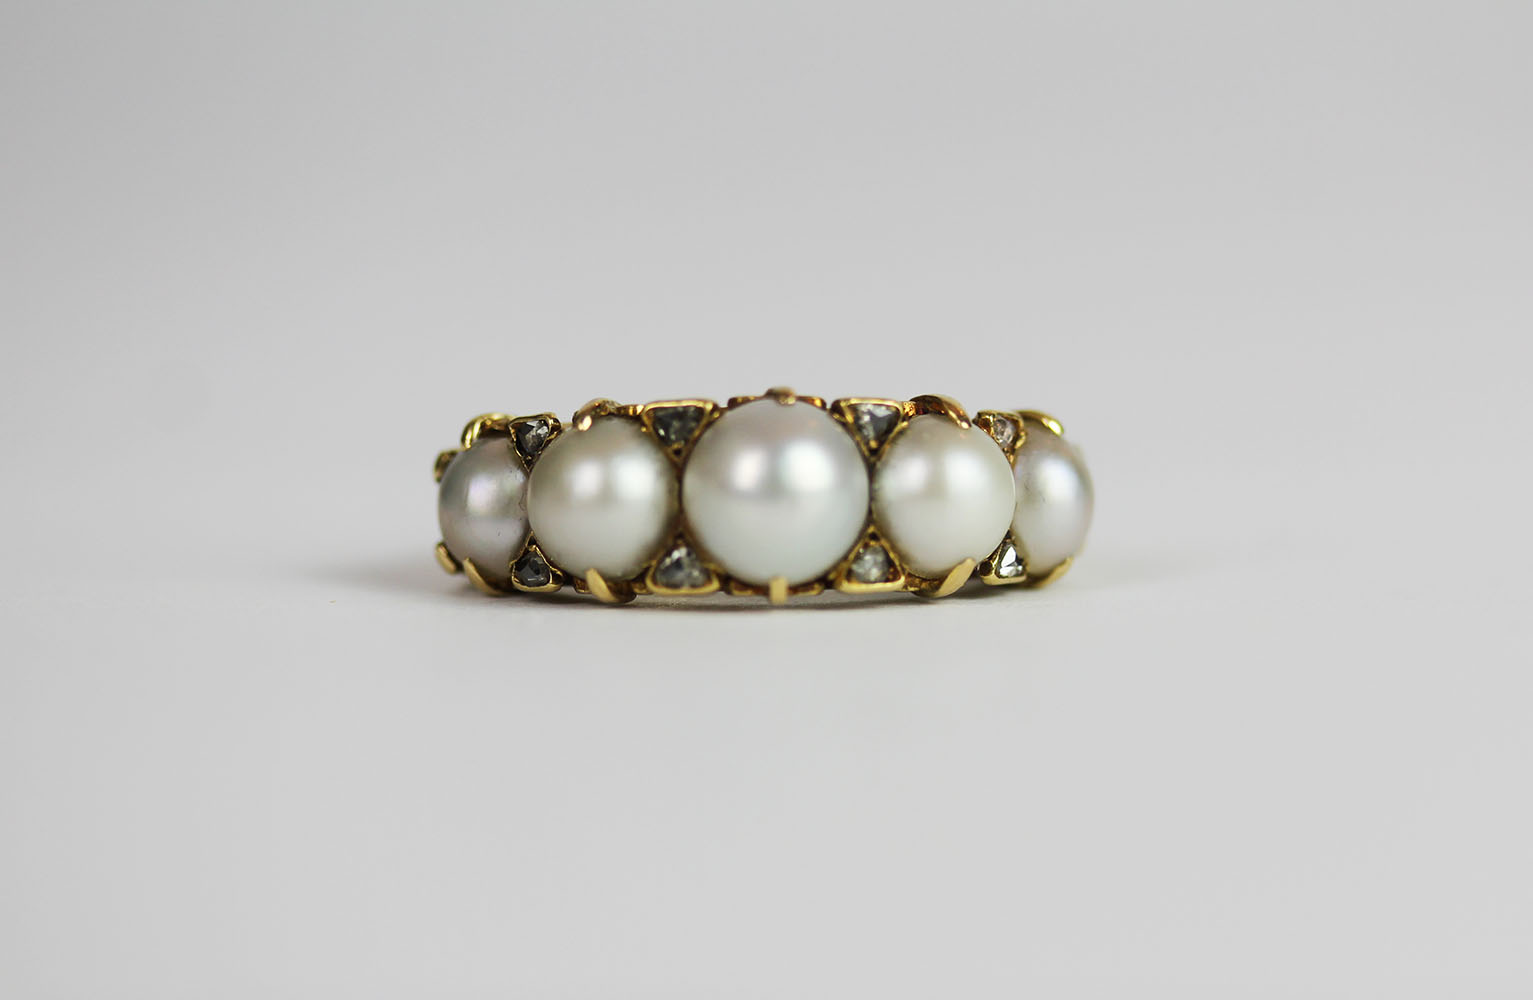 Pearl and Diamond ring, set with 5 graduated pearls and 8 diamonds, finger size L1/2, approximate